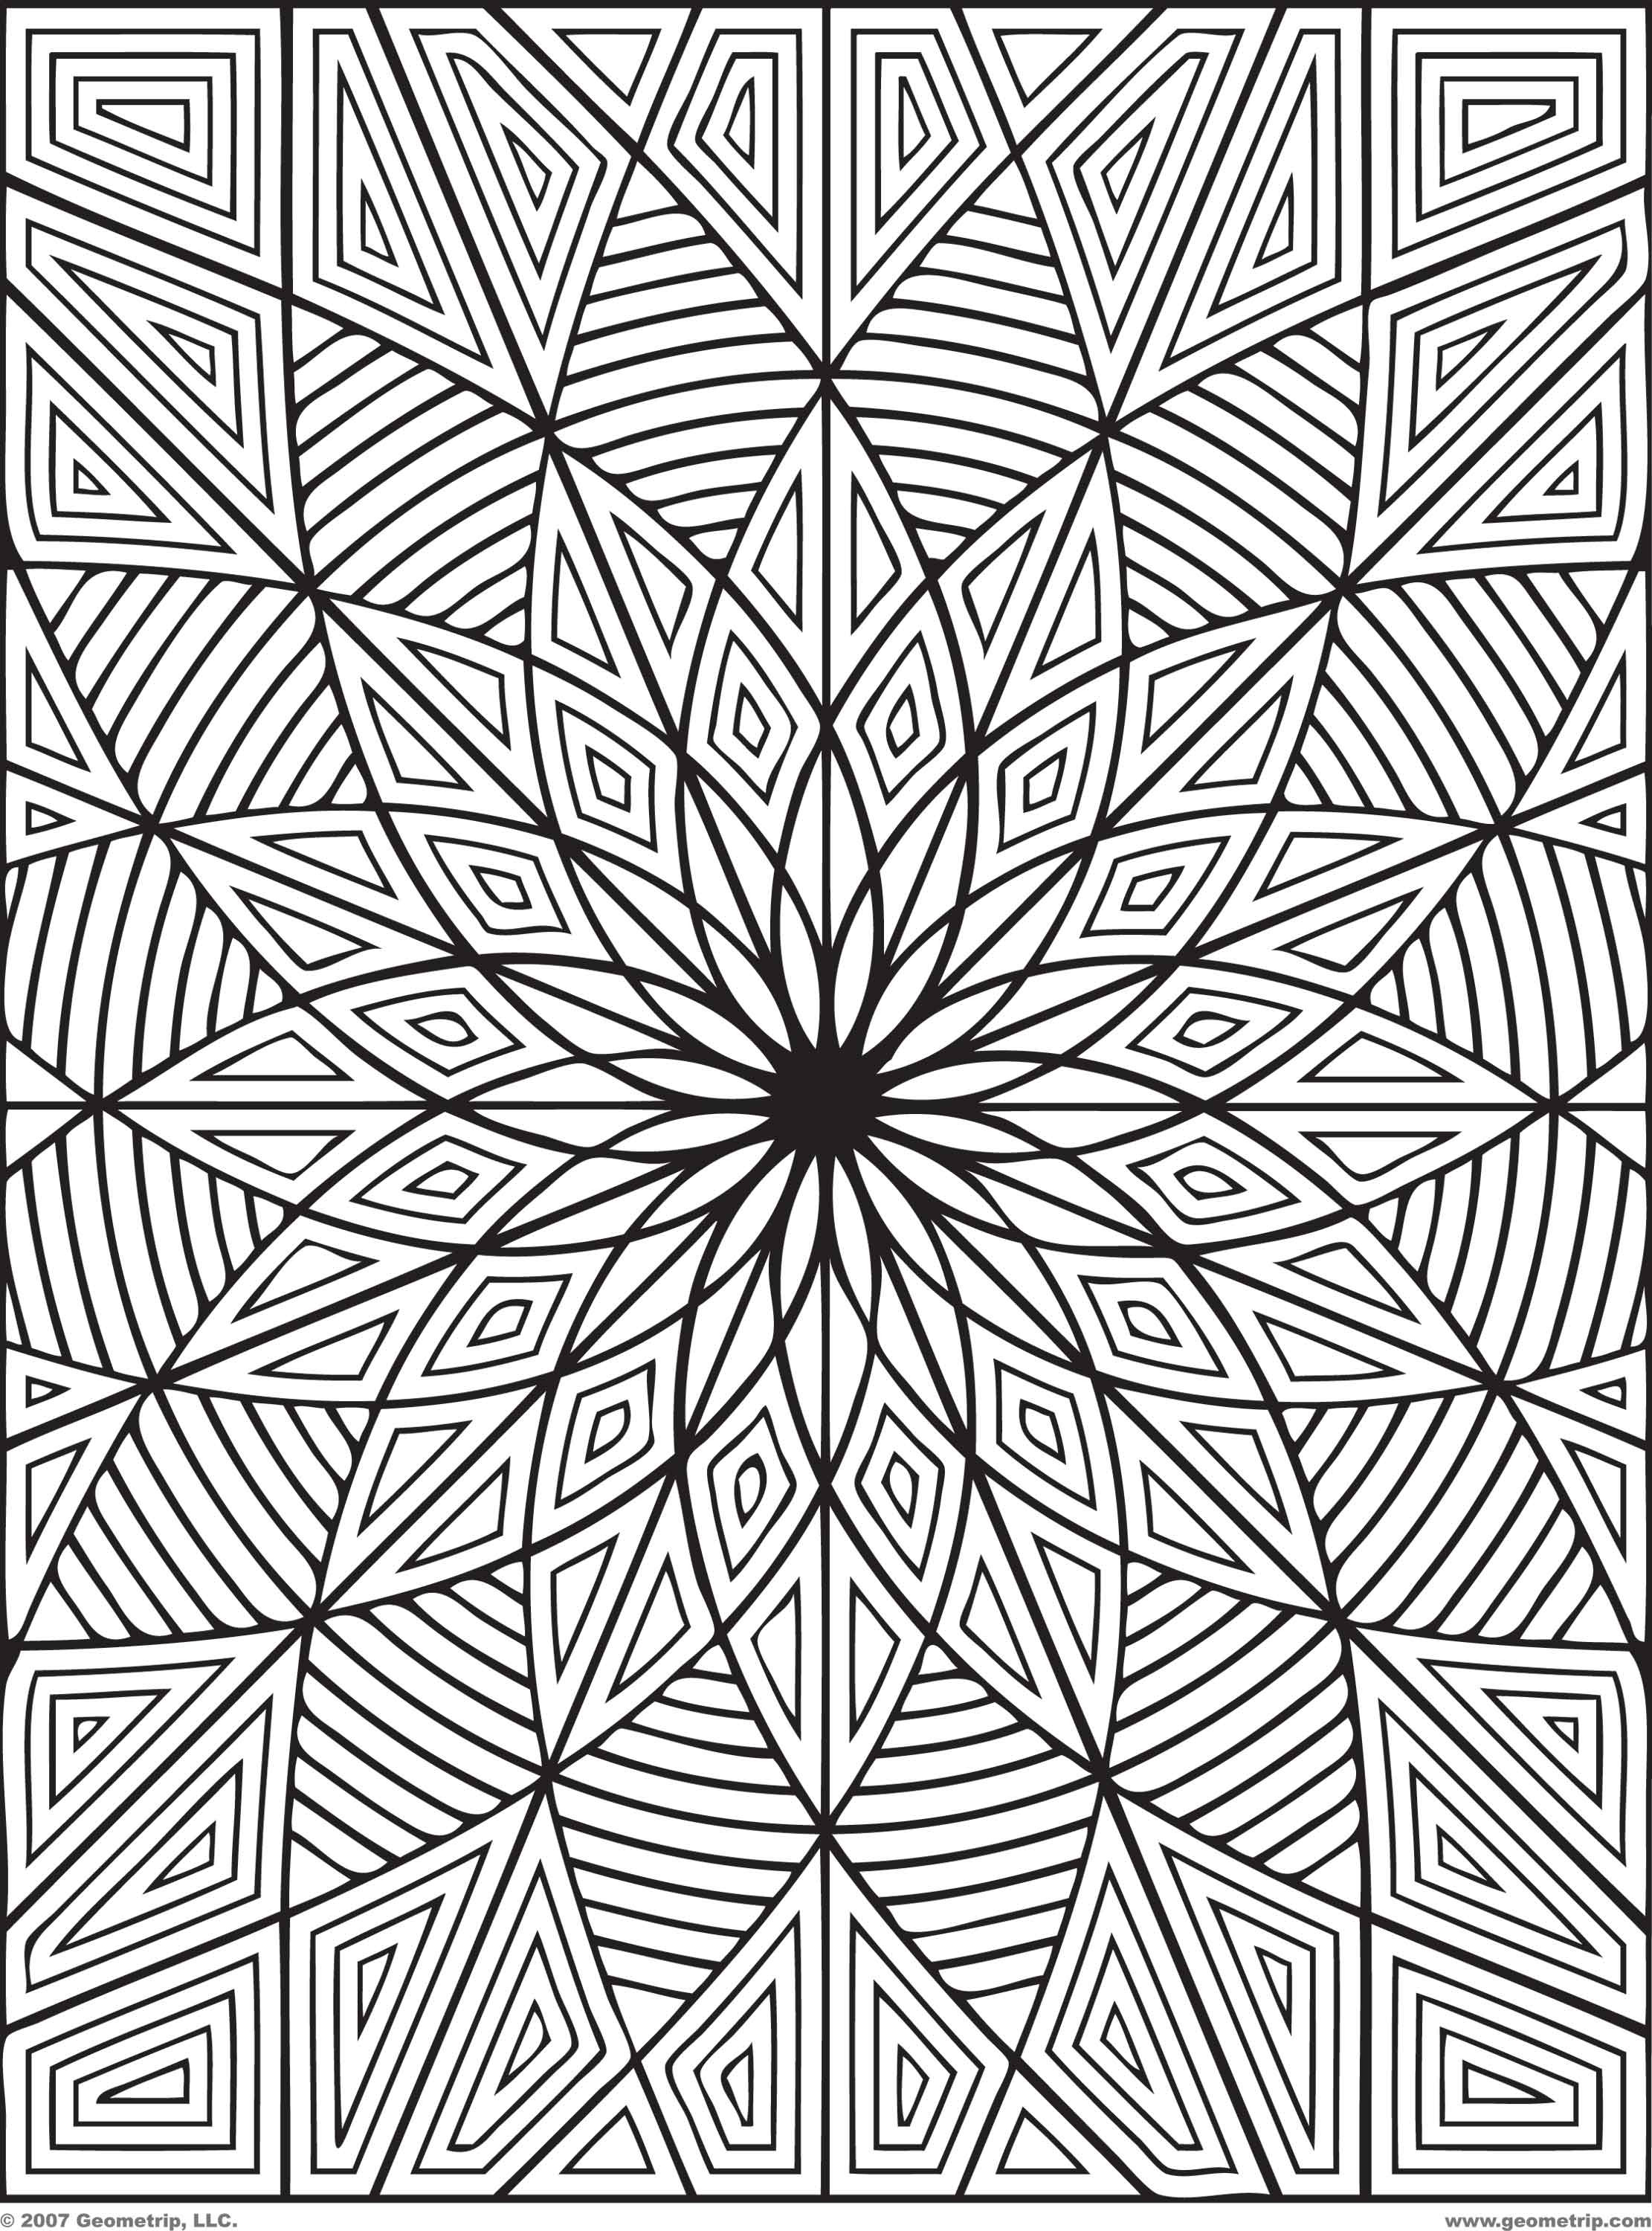 Pattern Coloring Pages For Adults
 Geometric Design Coloring Pages Bestofcoloring